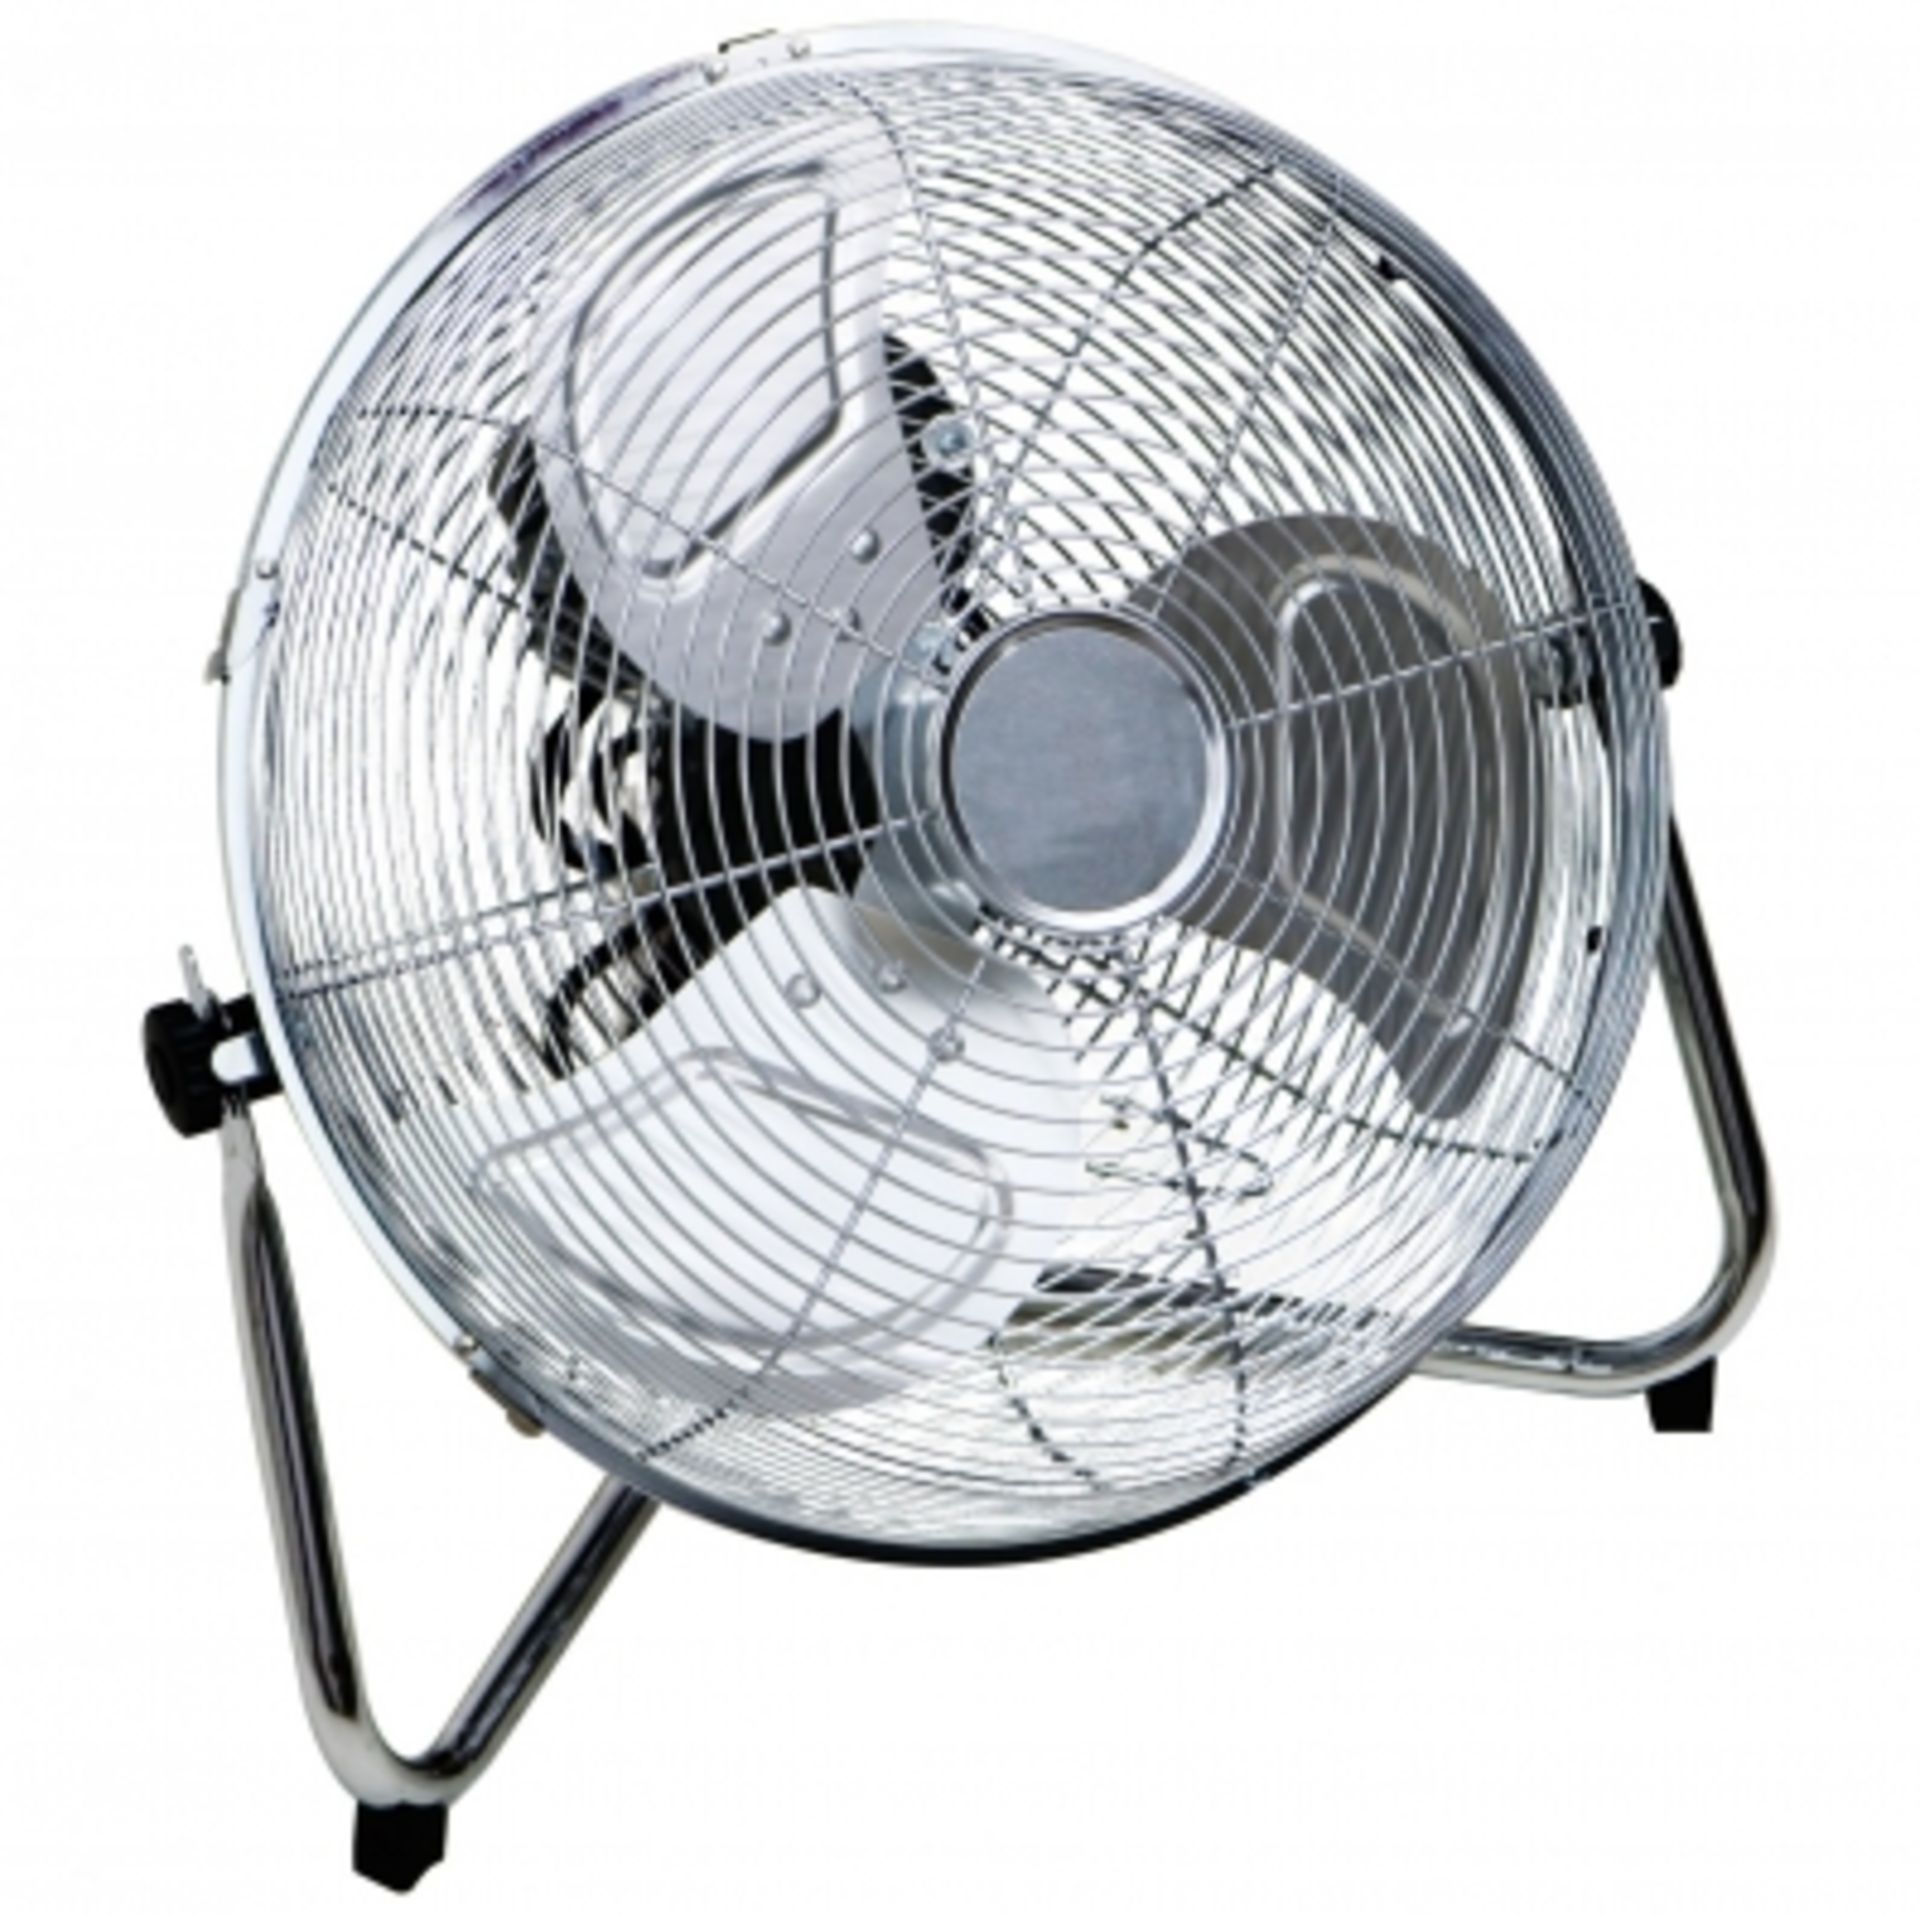 (RL122) 14" Inch Chrome 3 Speed Floor Standing Gym Fan Hydroponic Stay cool this year with t...